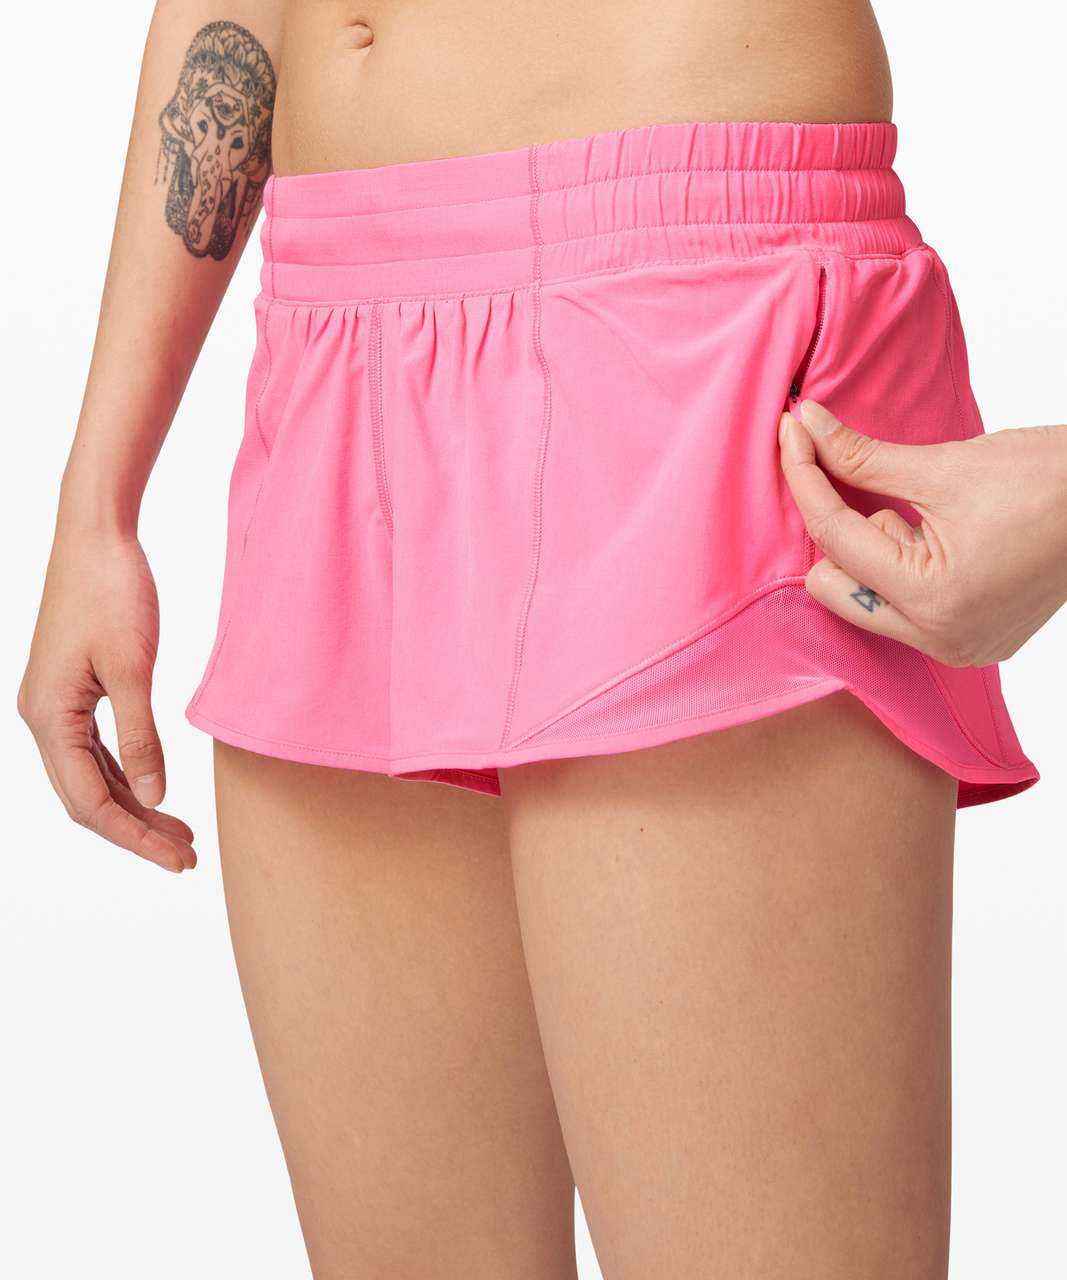 Lululemon Hotty Hot High-rise Lined Shorts 2.5 In Sonic Pink